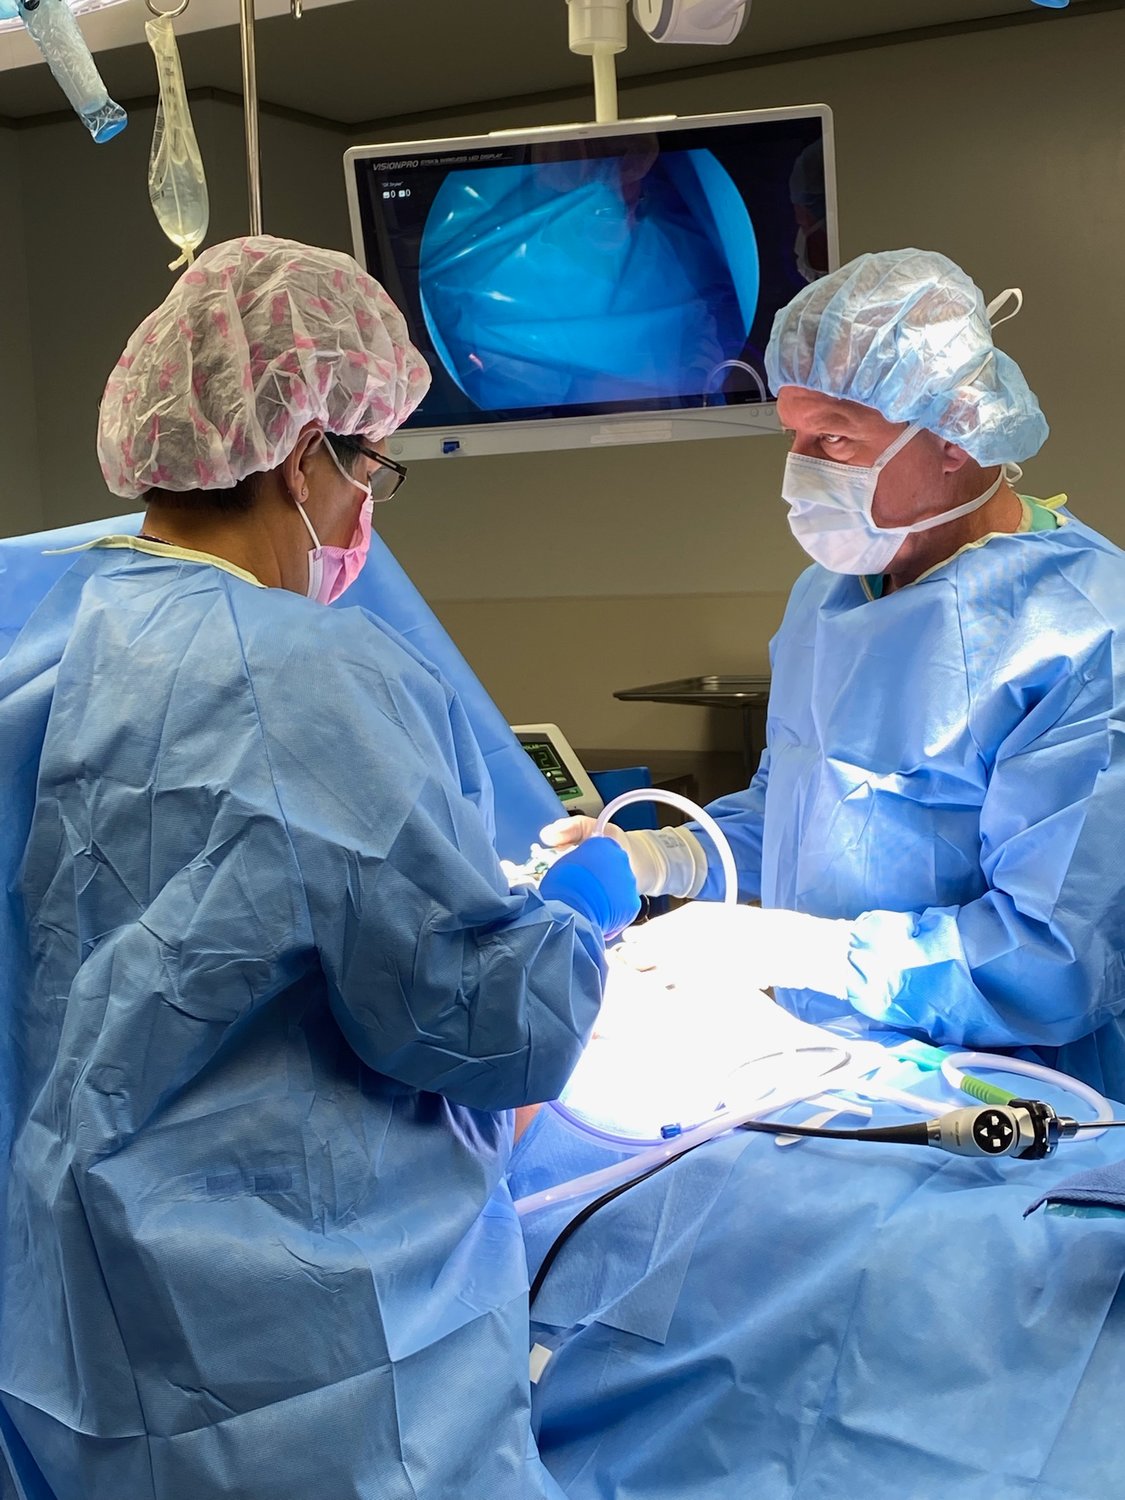 Dr. Stuart Braverman, right, performs surgery recently at Bothwell Regional Health Center with Cheri Gorrell, scrub nurse. Medical students are often able to assume the role of “first assistant” working across from surgeons, where they learn by helping select equipment, hold open incisions, stop bleeding or close incisions.